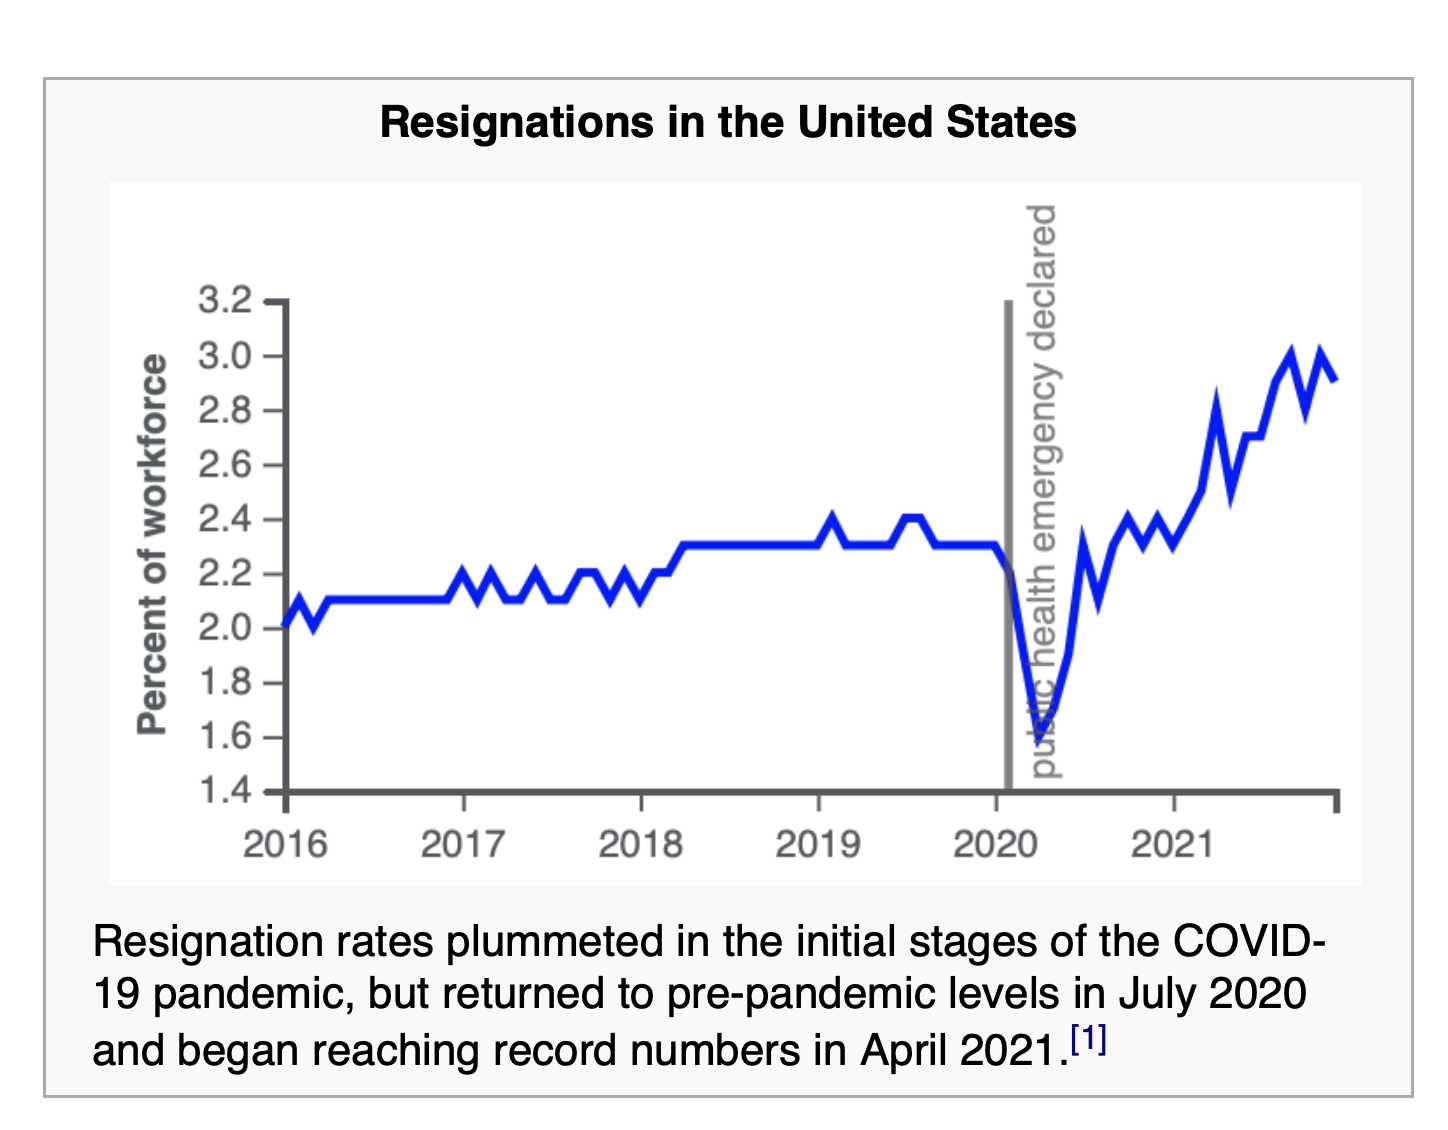 Graph showing resignation rates in the us. Resignation rates plummeted in the initial stages of the COVID-19 Pandemic, but returned to pre-pandemic levels in July 2020 and began reaching record numbers in April 2021.